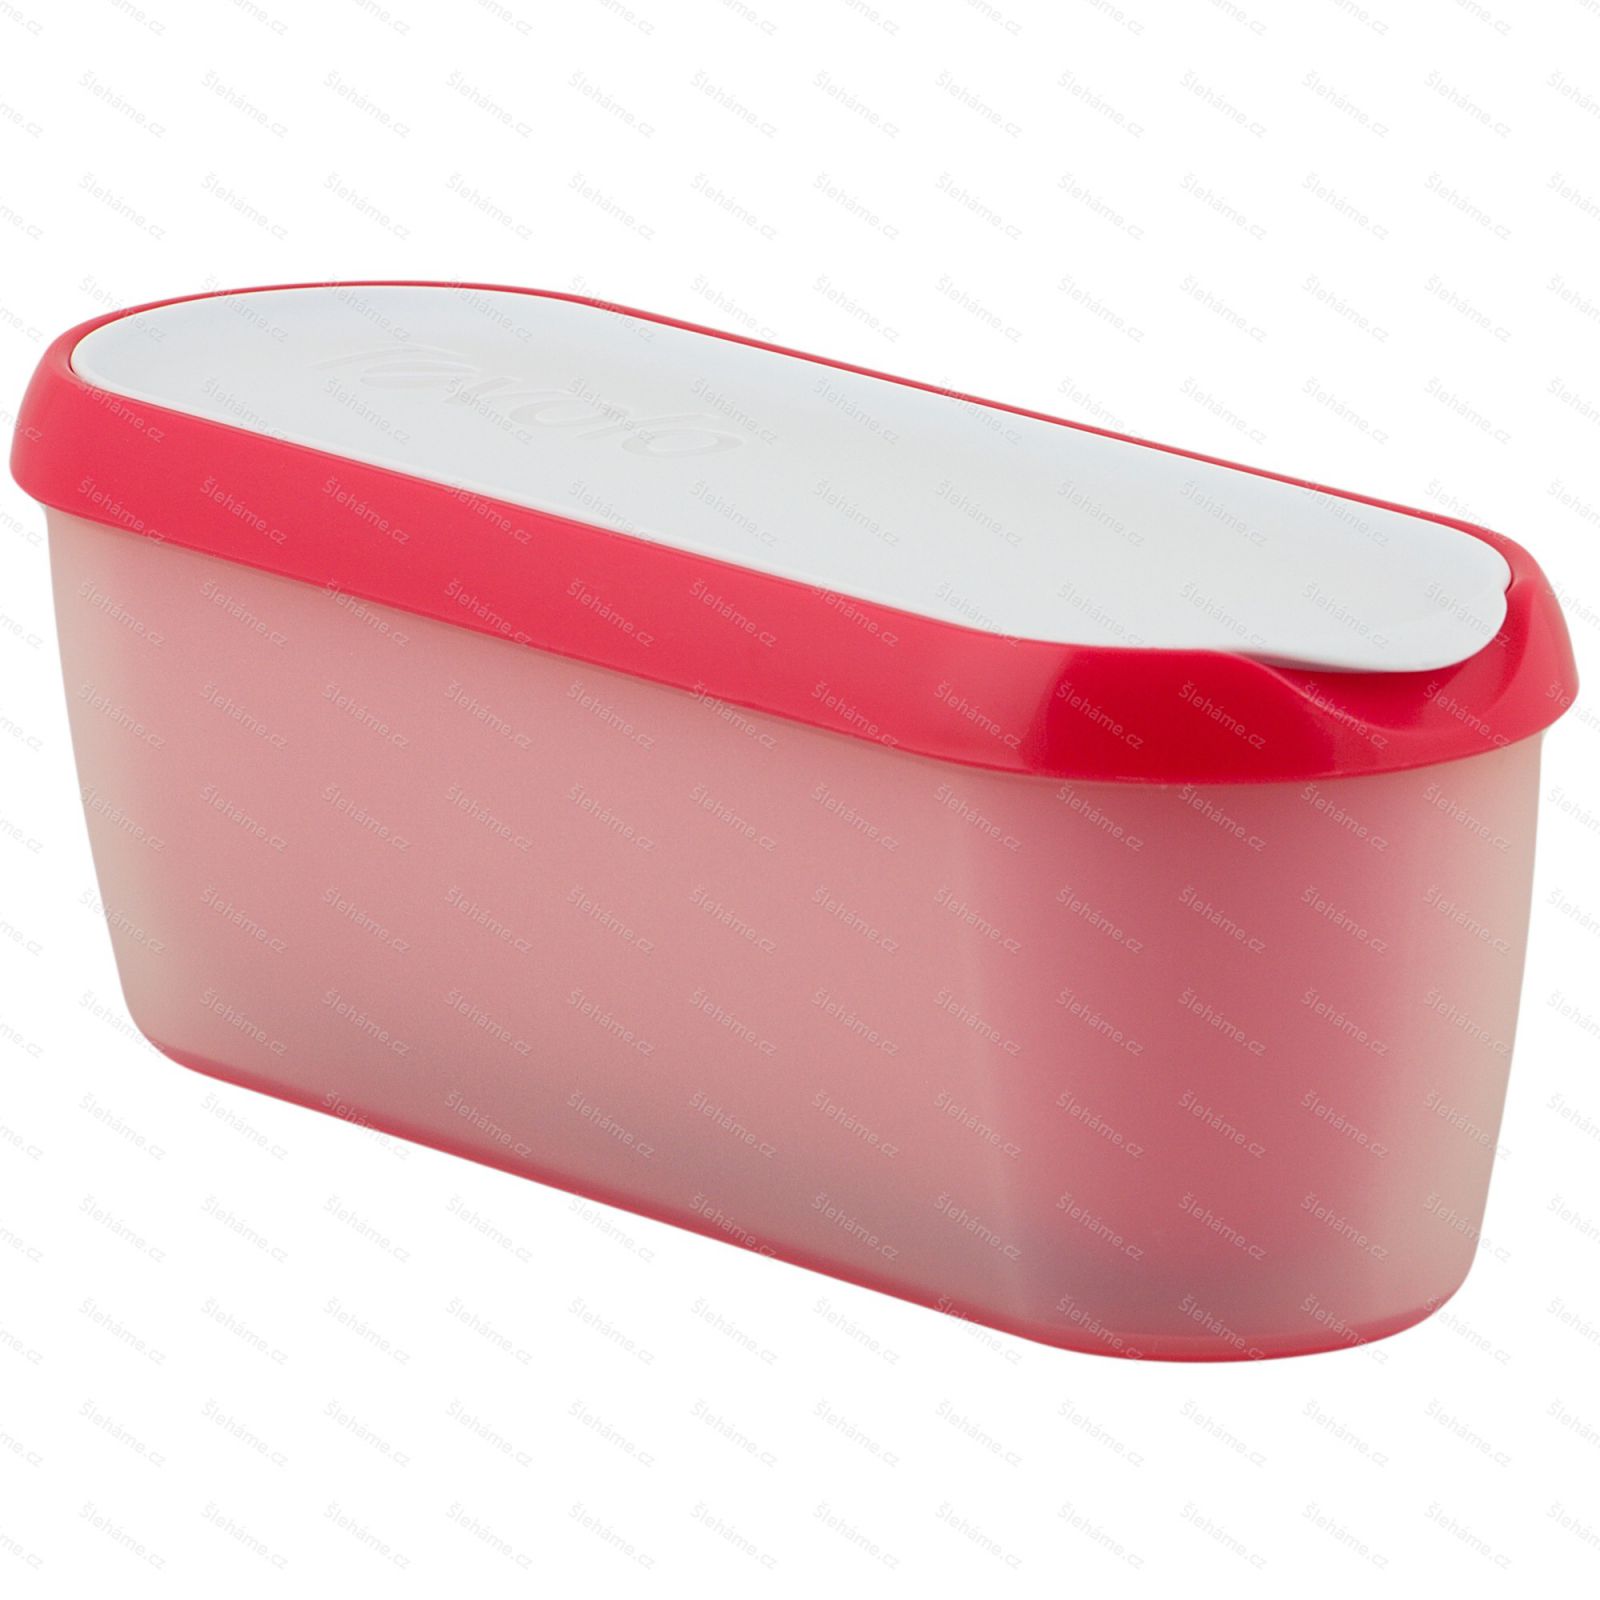 Ice cream tub Tovolo GLIDE-A-SCOOP 1.4 l, strawberry sorbet - hlavní pohled